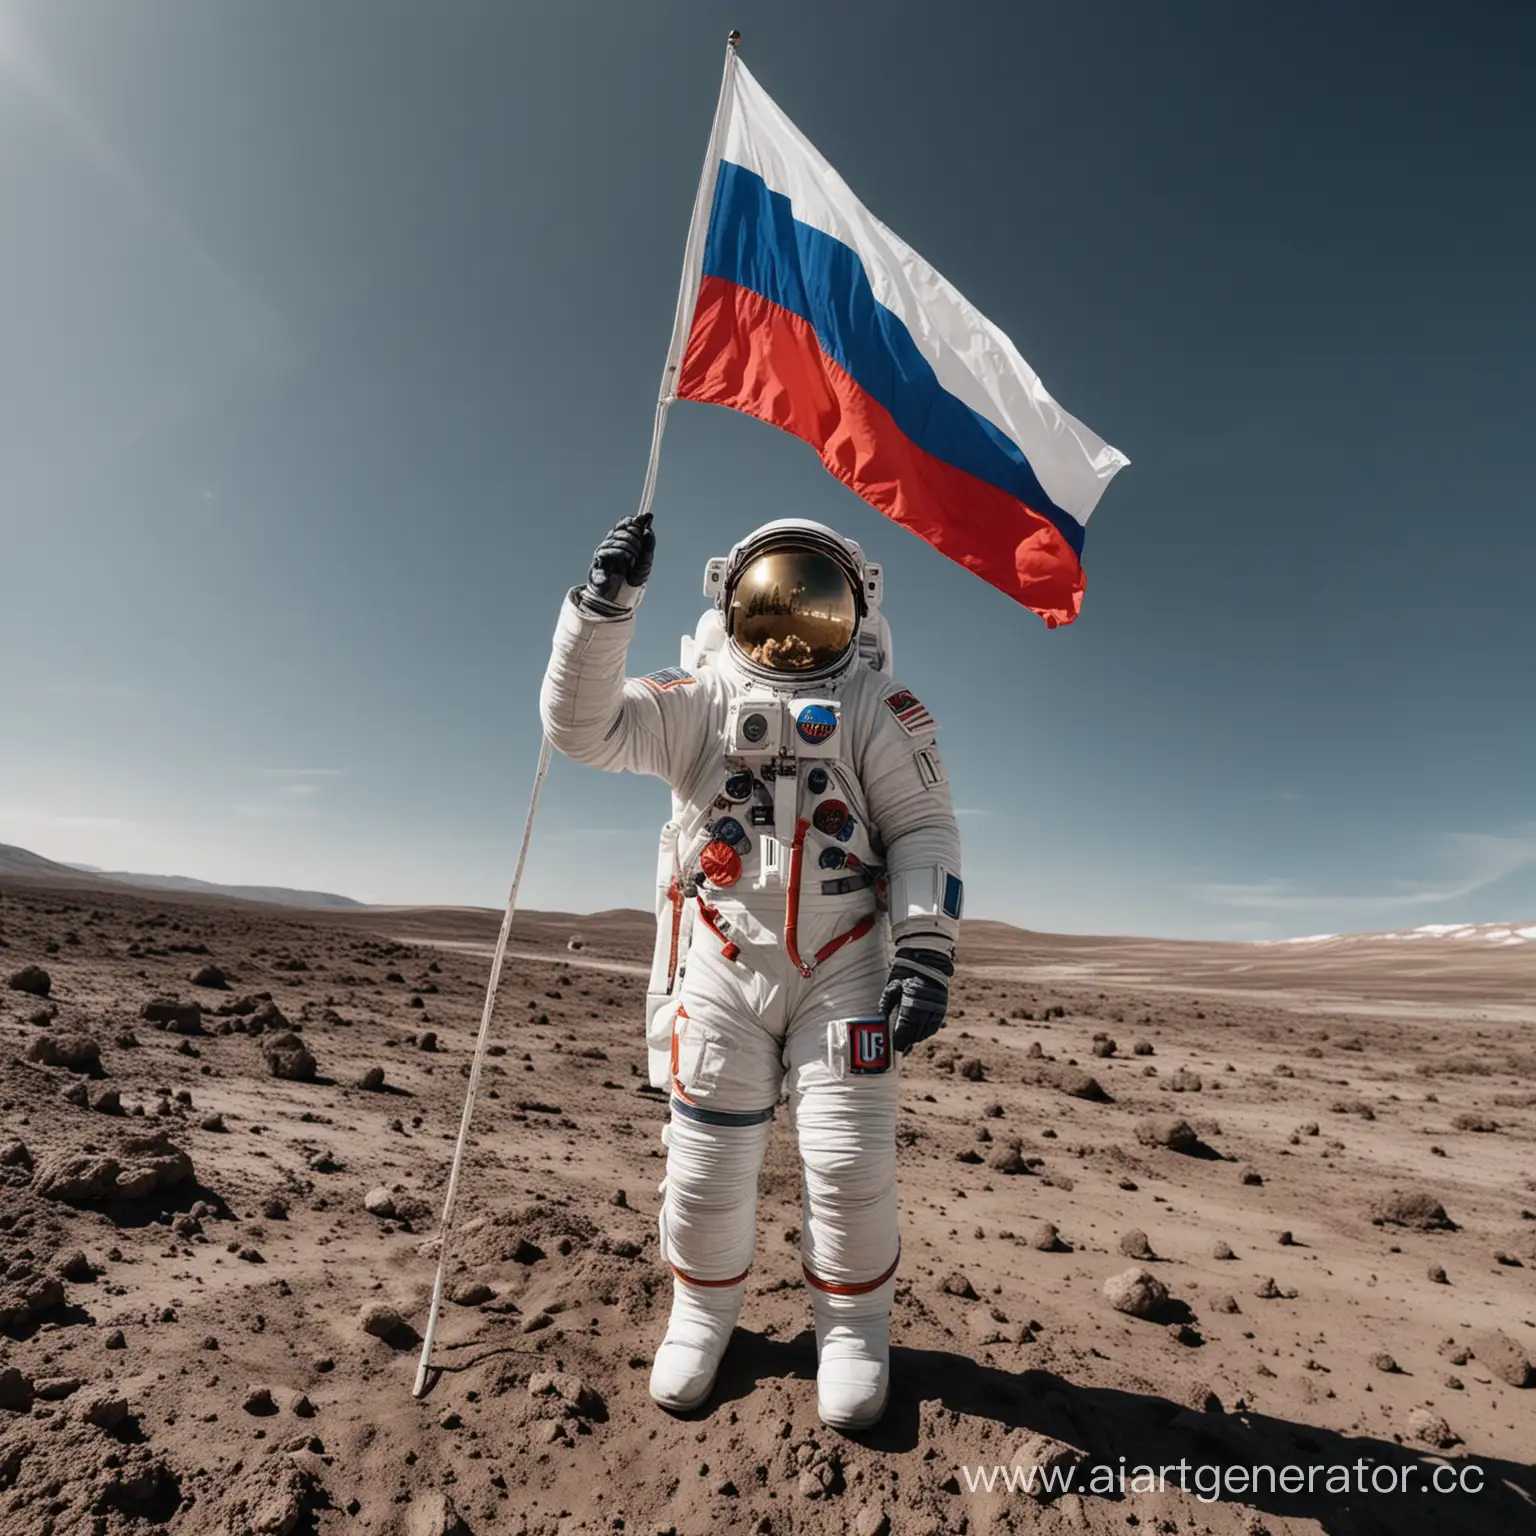 Russian-Astronaut-Waving-in-Space-with-Flag-Patch